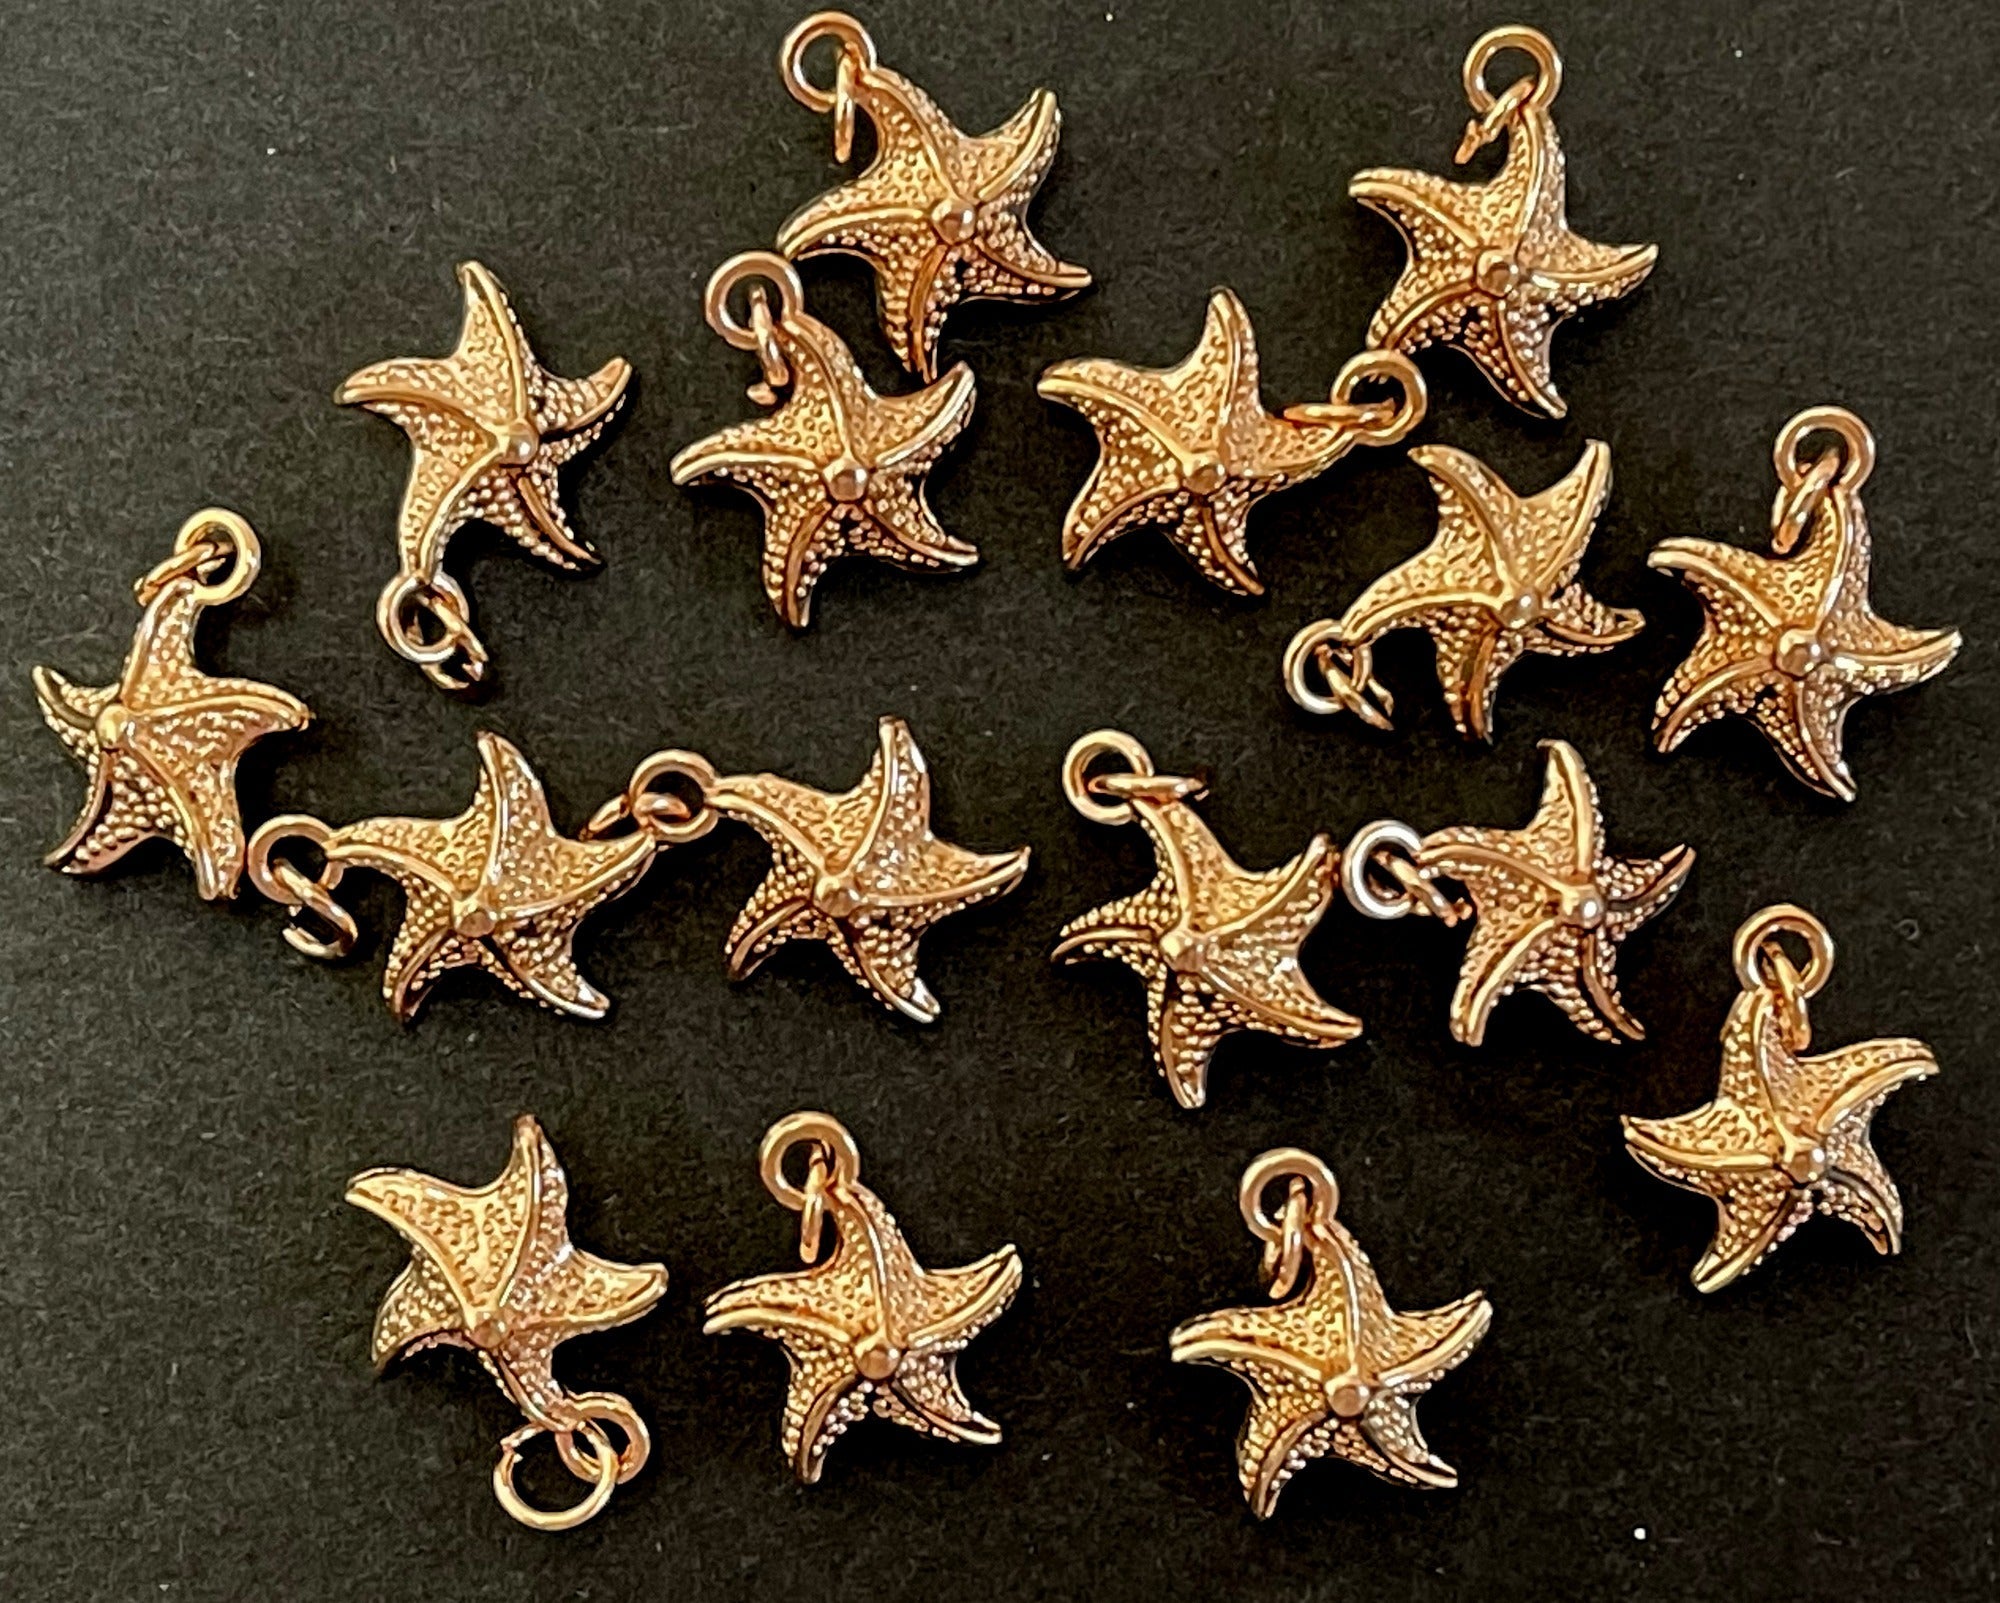 Star Fish charm 13x17mm 14K Rose Gold plated metal alloy pendant